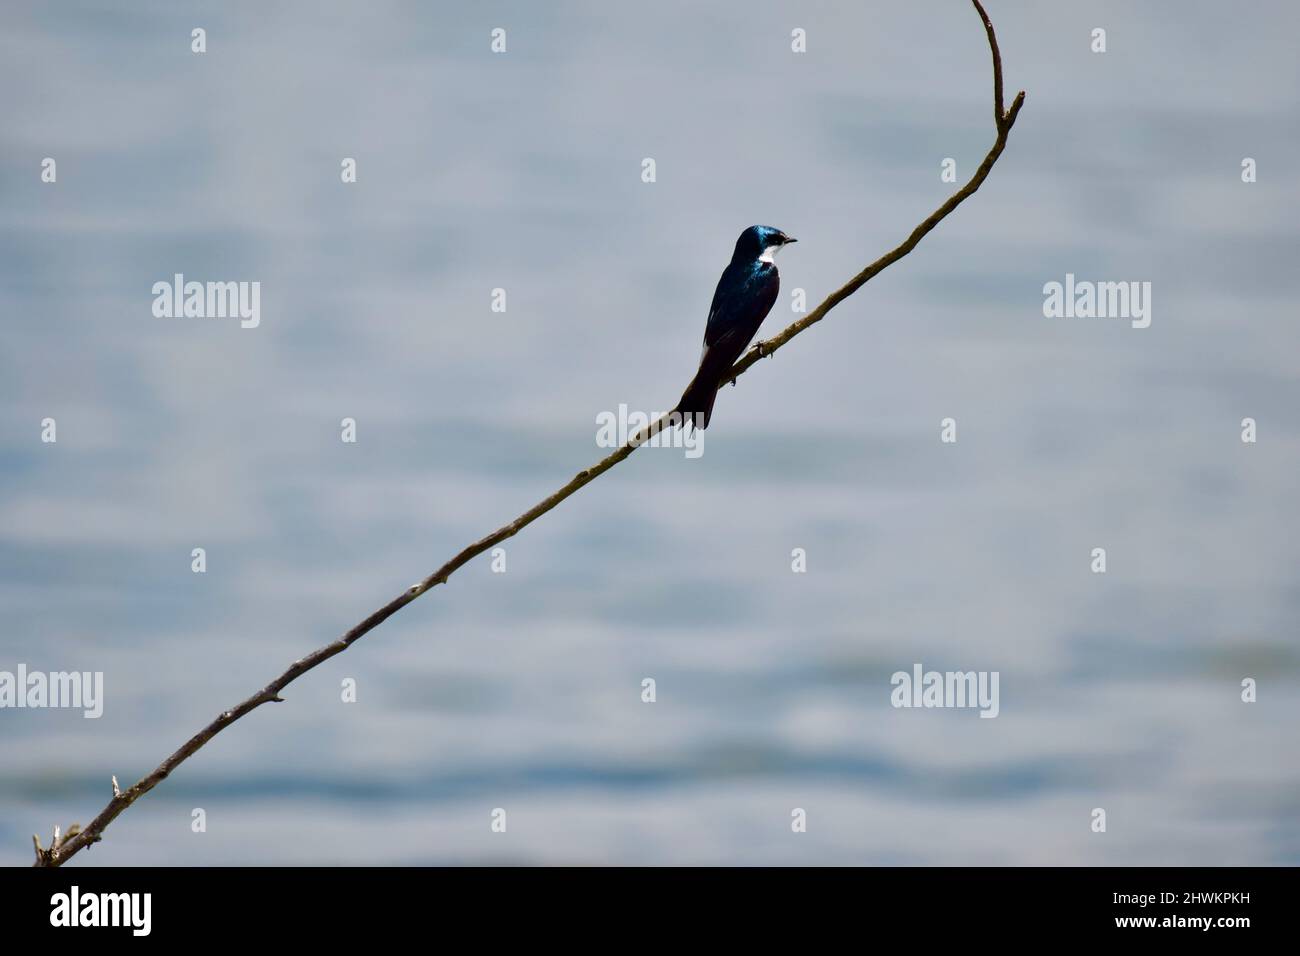 A lone mangrove swallow (Tachycineta albilinea) perched on a branch over the water at the National Wildlife Sanctuary in Crooked Tree, Belize. Stock Photo